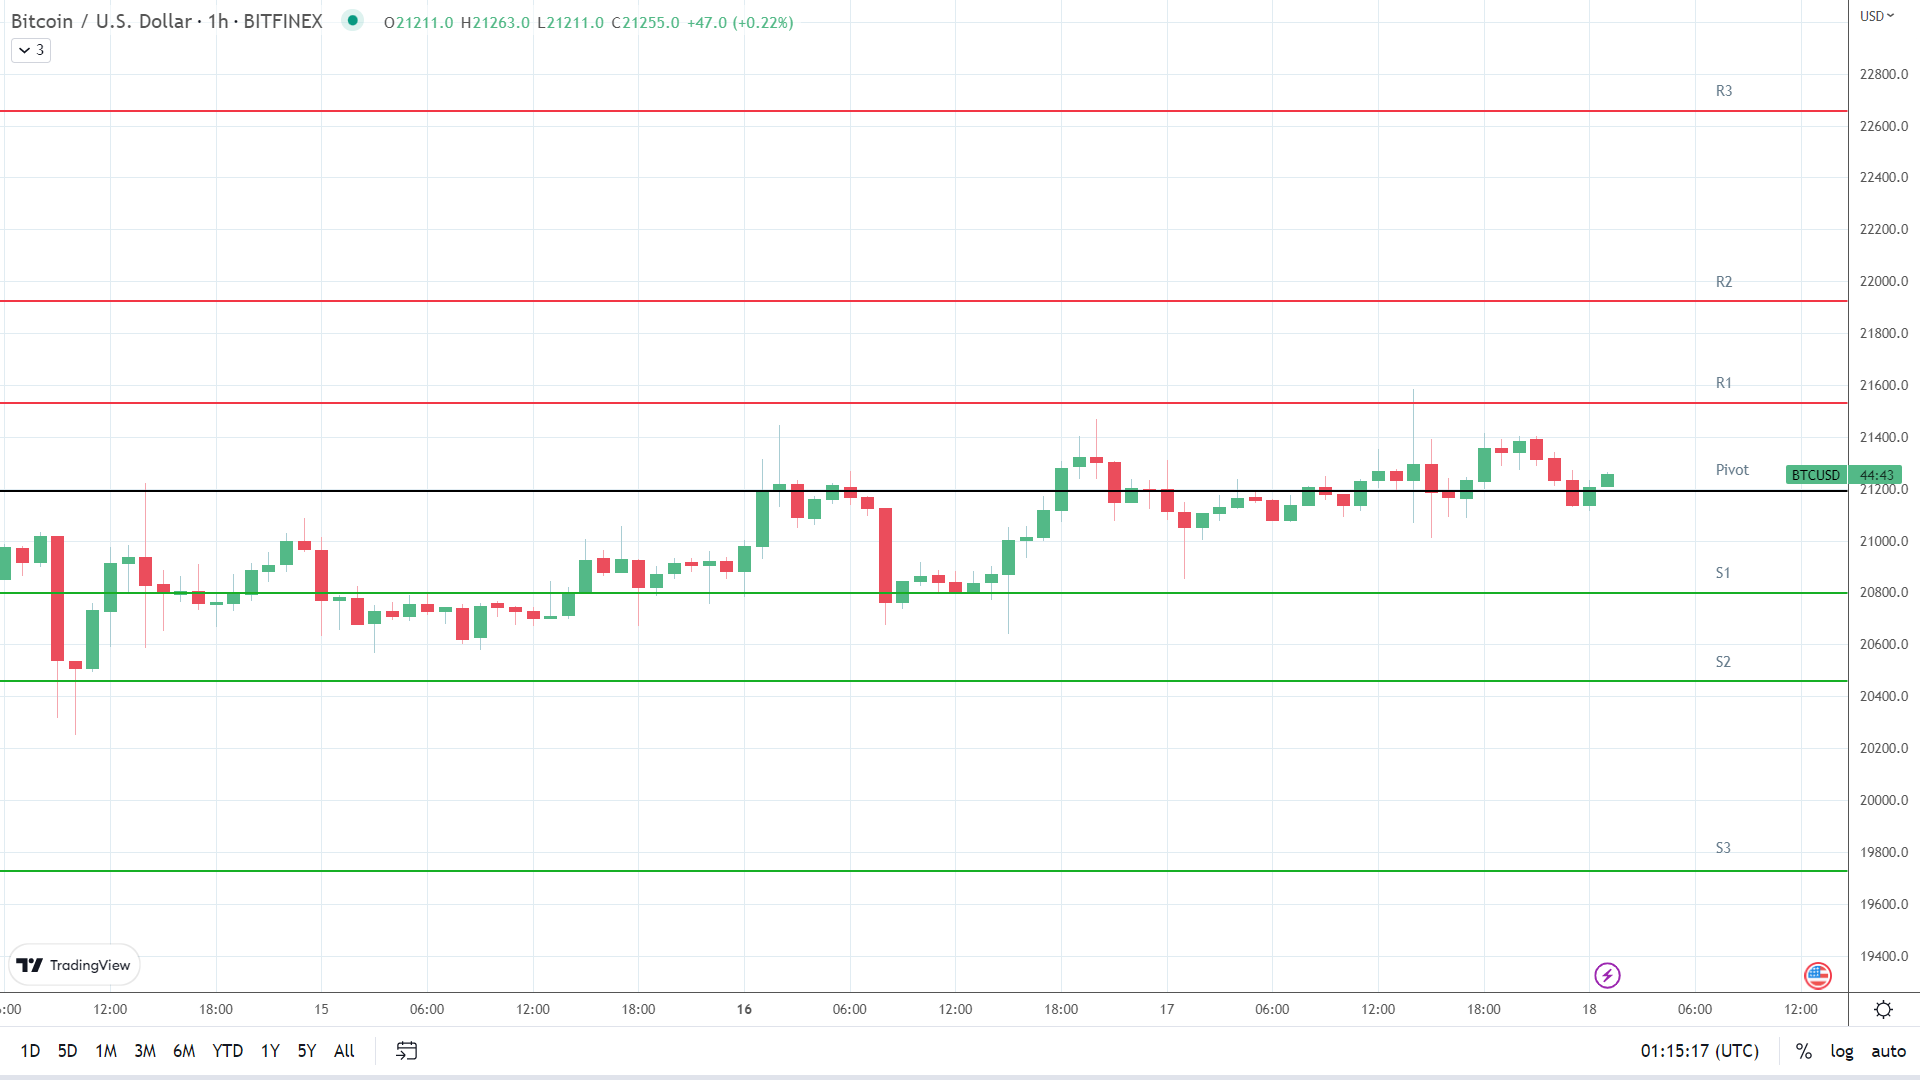 BTC resistance levels in play below the pivot.